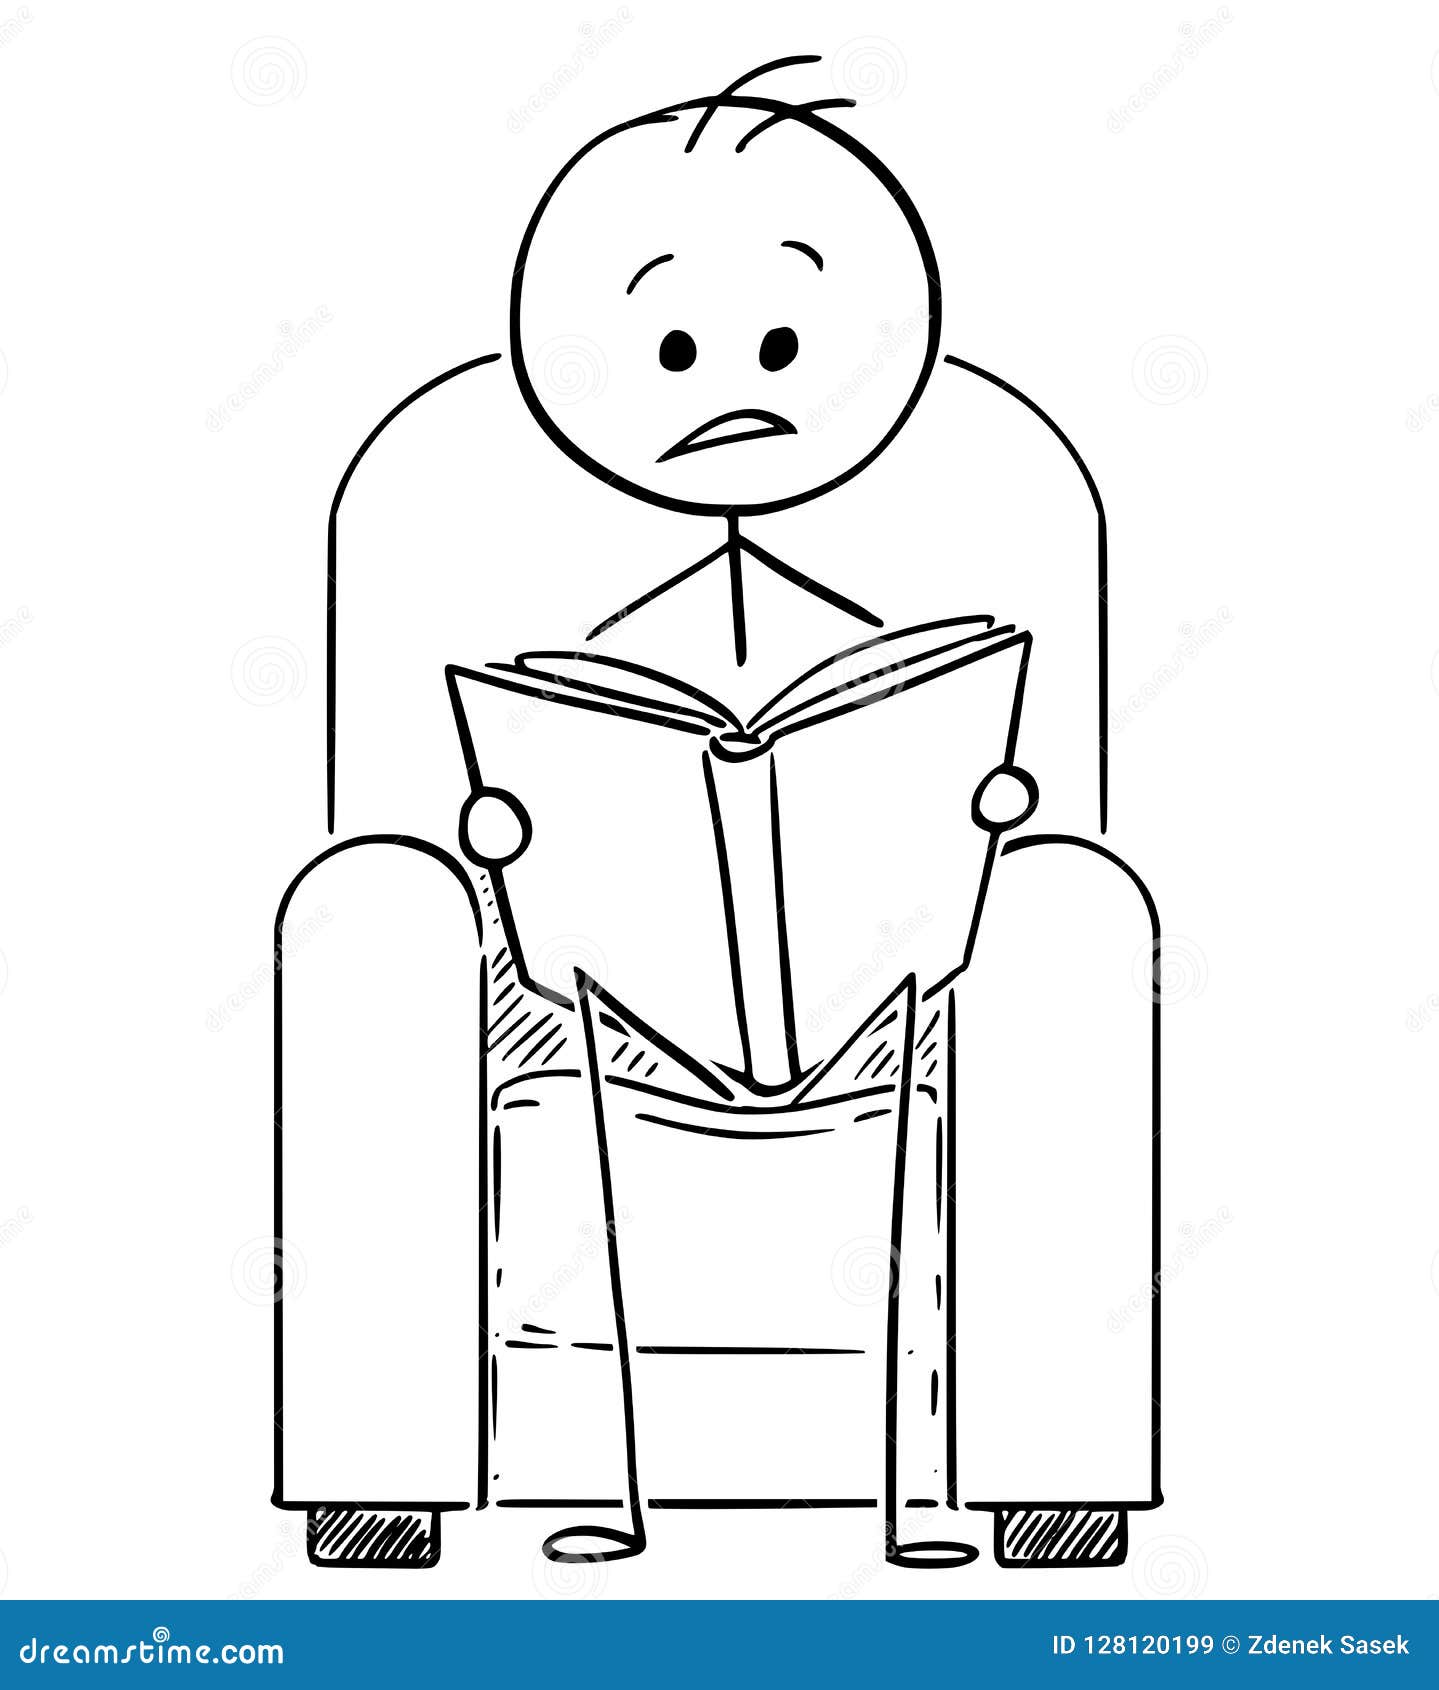 Cartoon of Man Sitting in Armchair and Reading a Book Stock Vector